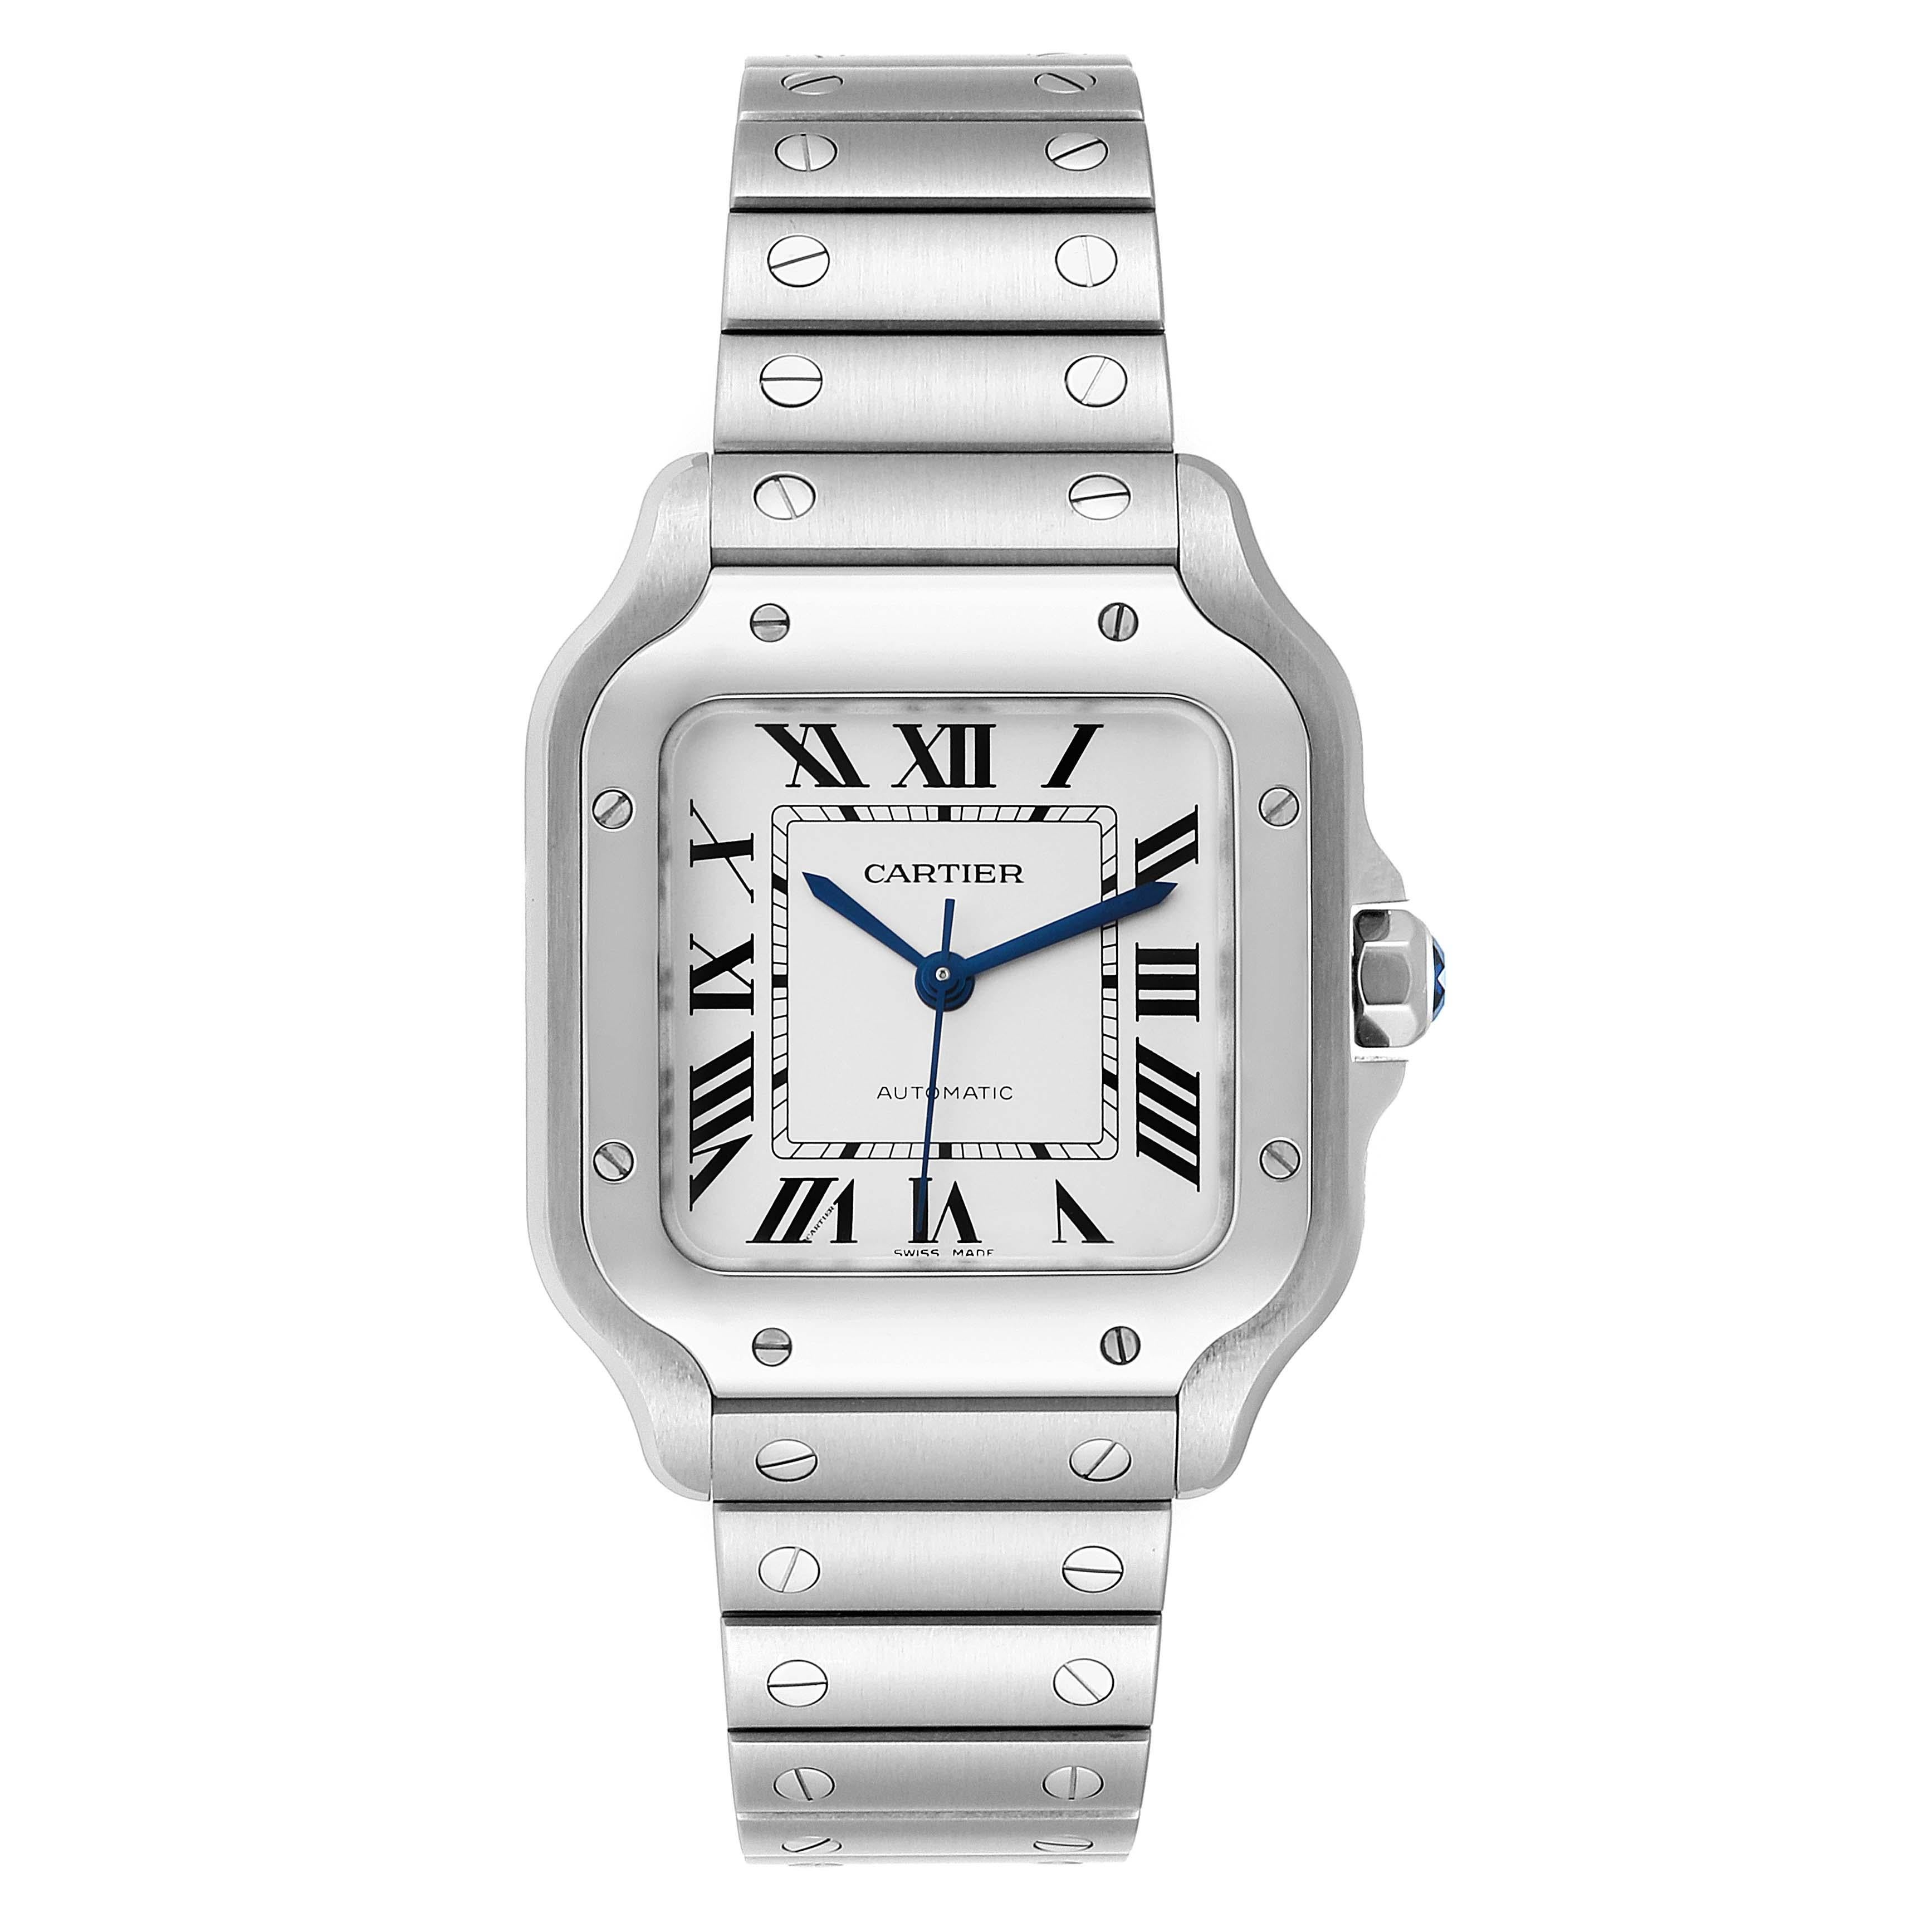 Cartier Santos Galbee Medium Steel Mens Watch WSSA0010 Unworn. Automatic self-winding movement. Stainless steel case 35.1 mm x 41.9 mm mm. Steel octagonal crown set with the faceted spinel. Stainless steel bezel punctuated with 8 signature screws.